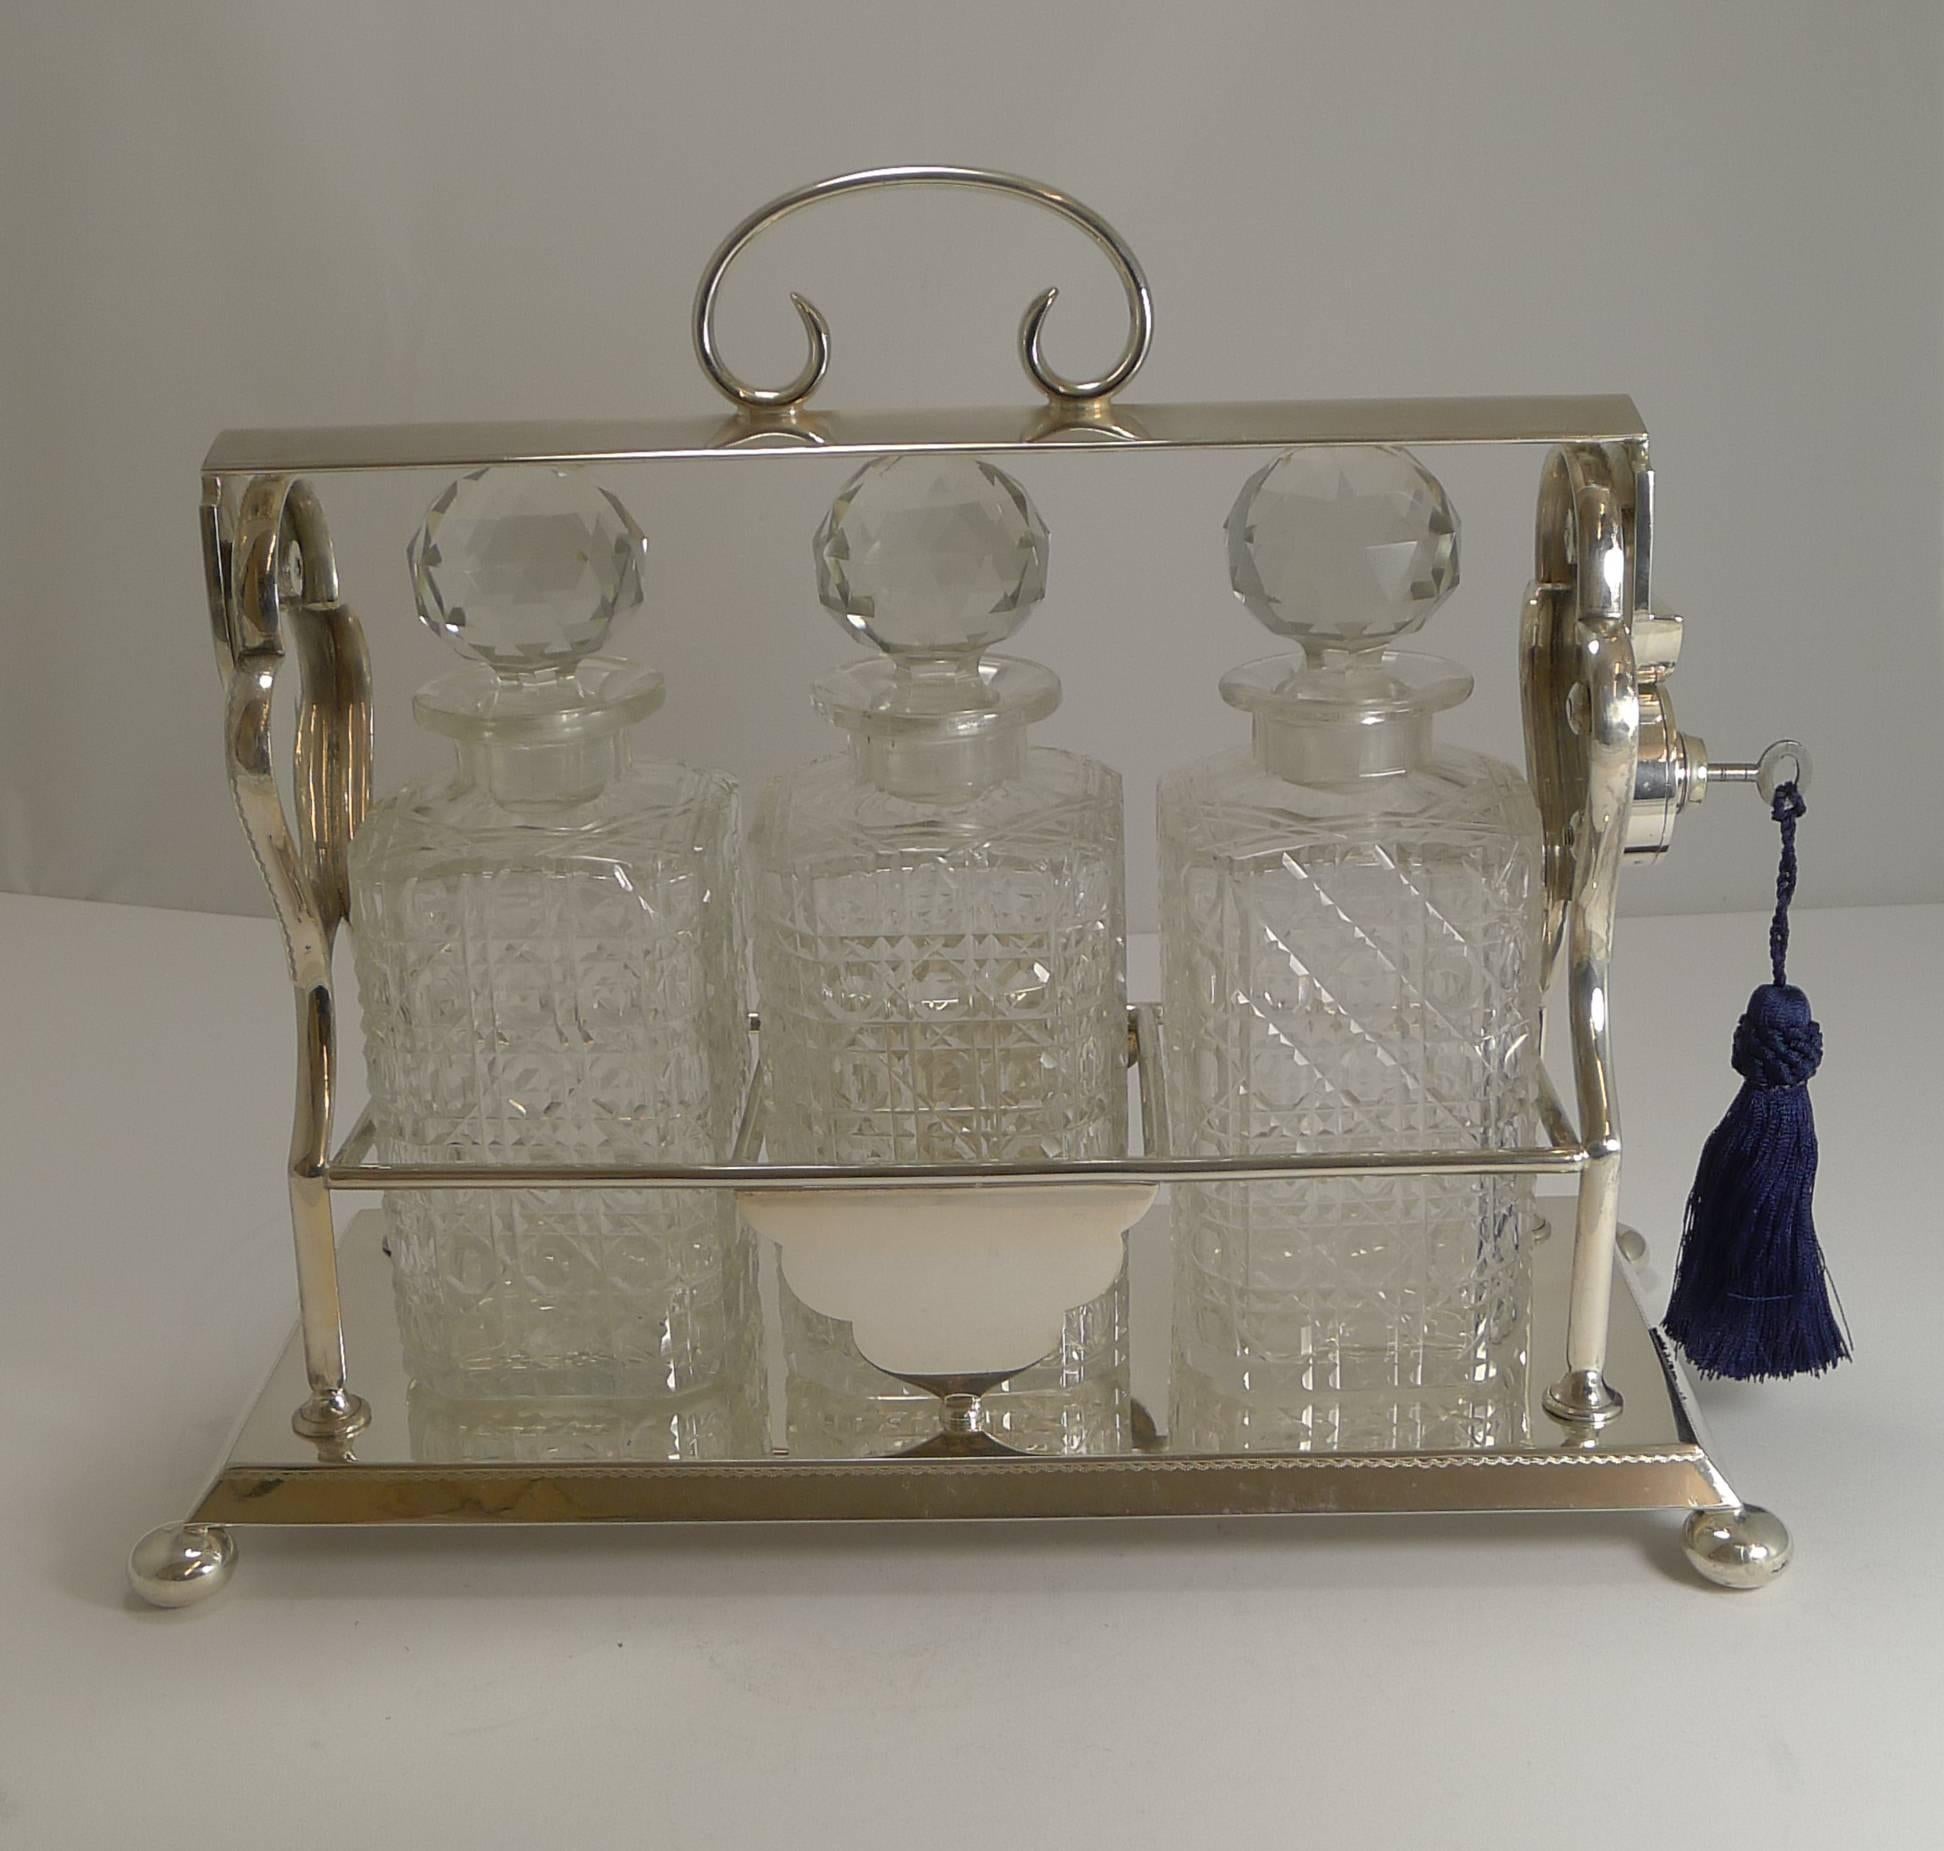 A handsome antique English three decanter Tantalus with silver plated frame and standing on four bun feet.

The working key requires a clockwise turn, the lock barrel is then pushed down to release the bar covering the stoppers. The bar then snaps